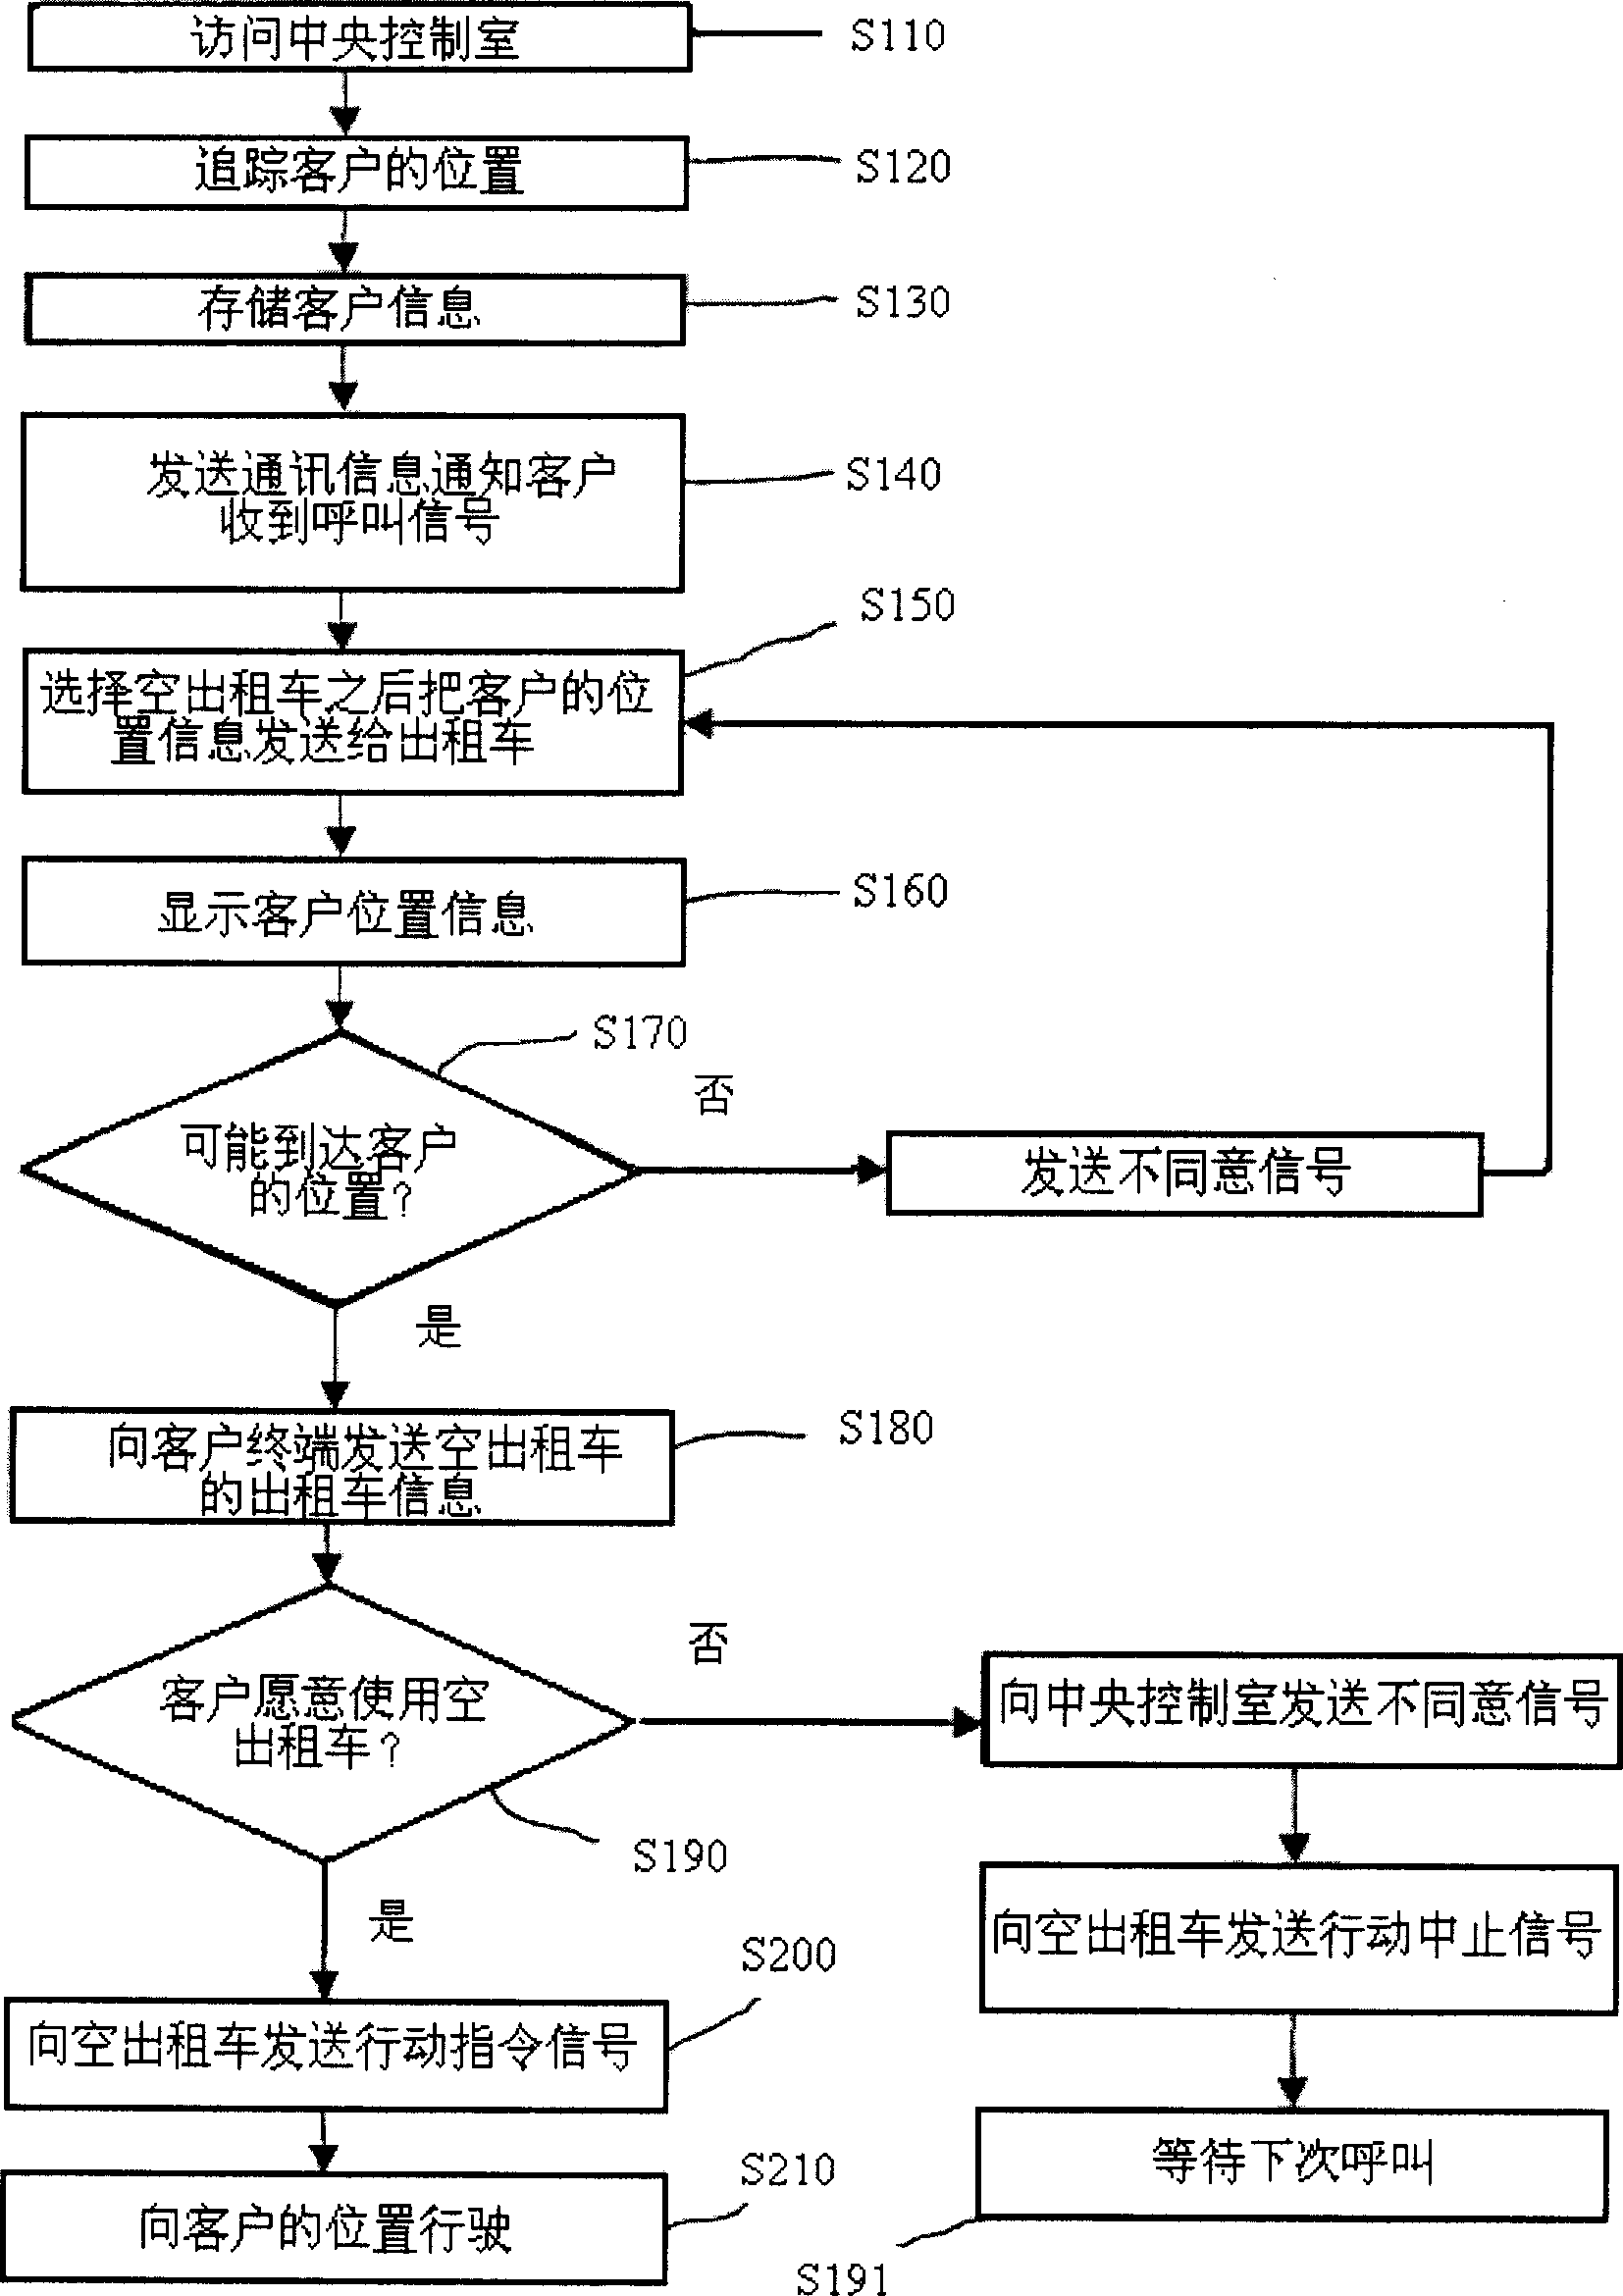 Method for providing automatic connection service for taxis using communication network